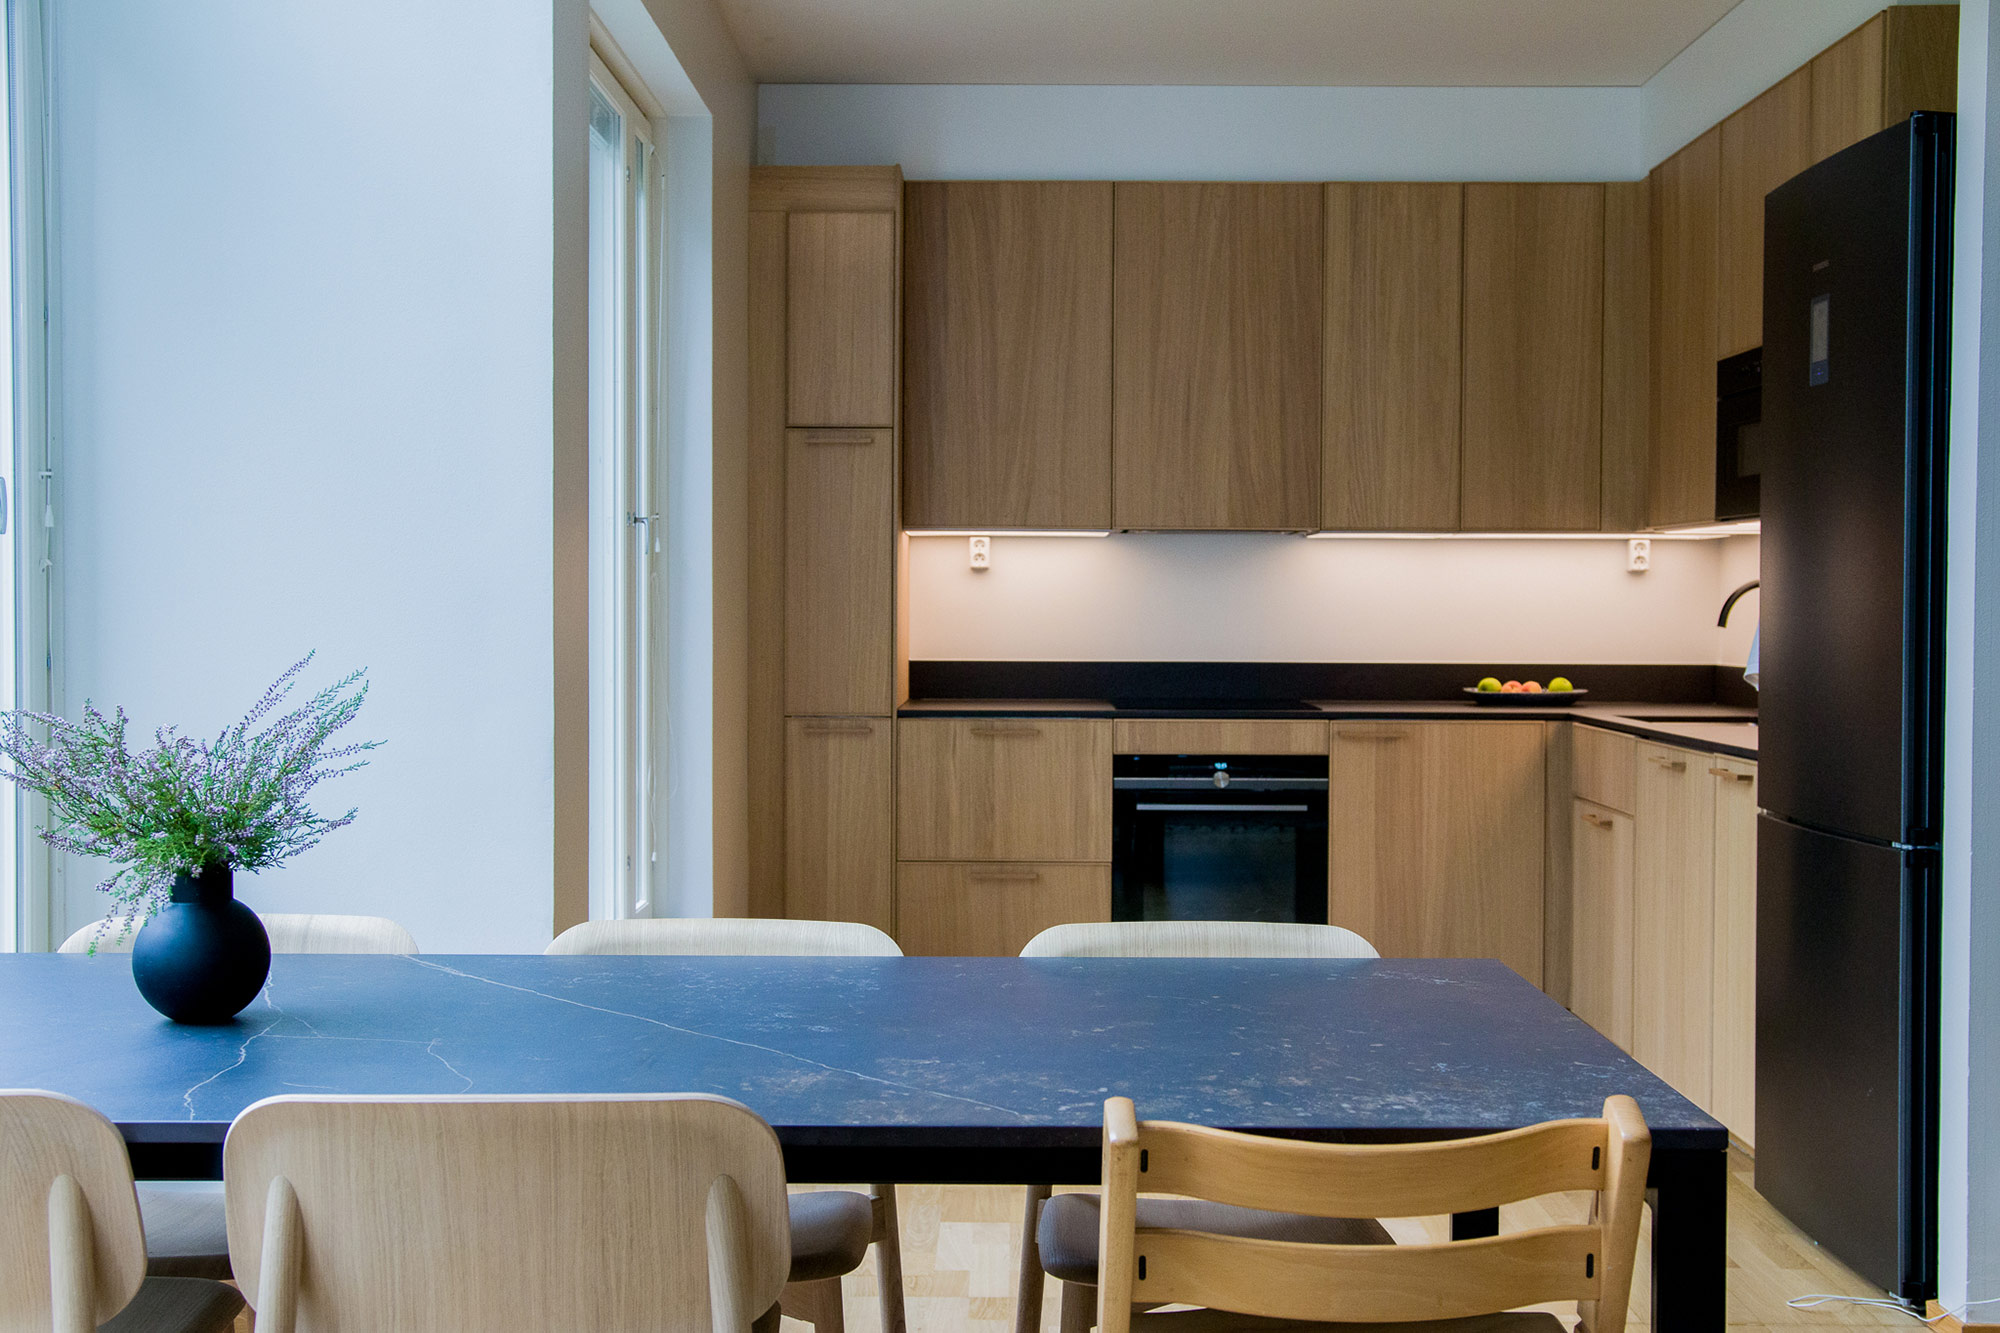 Image of Emma Rapala 9 in A durable kitchen and dining area for an arty family with children - Cosentino